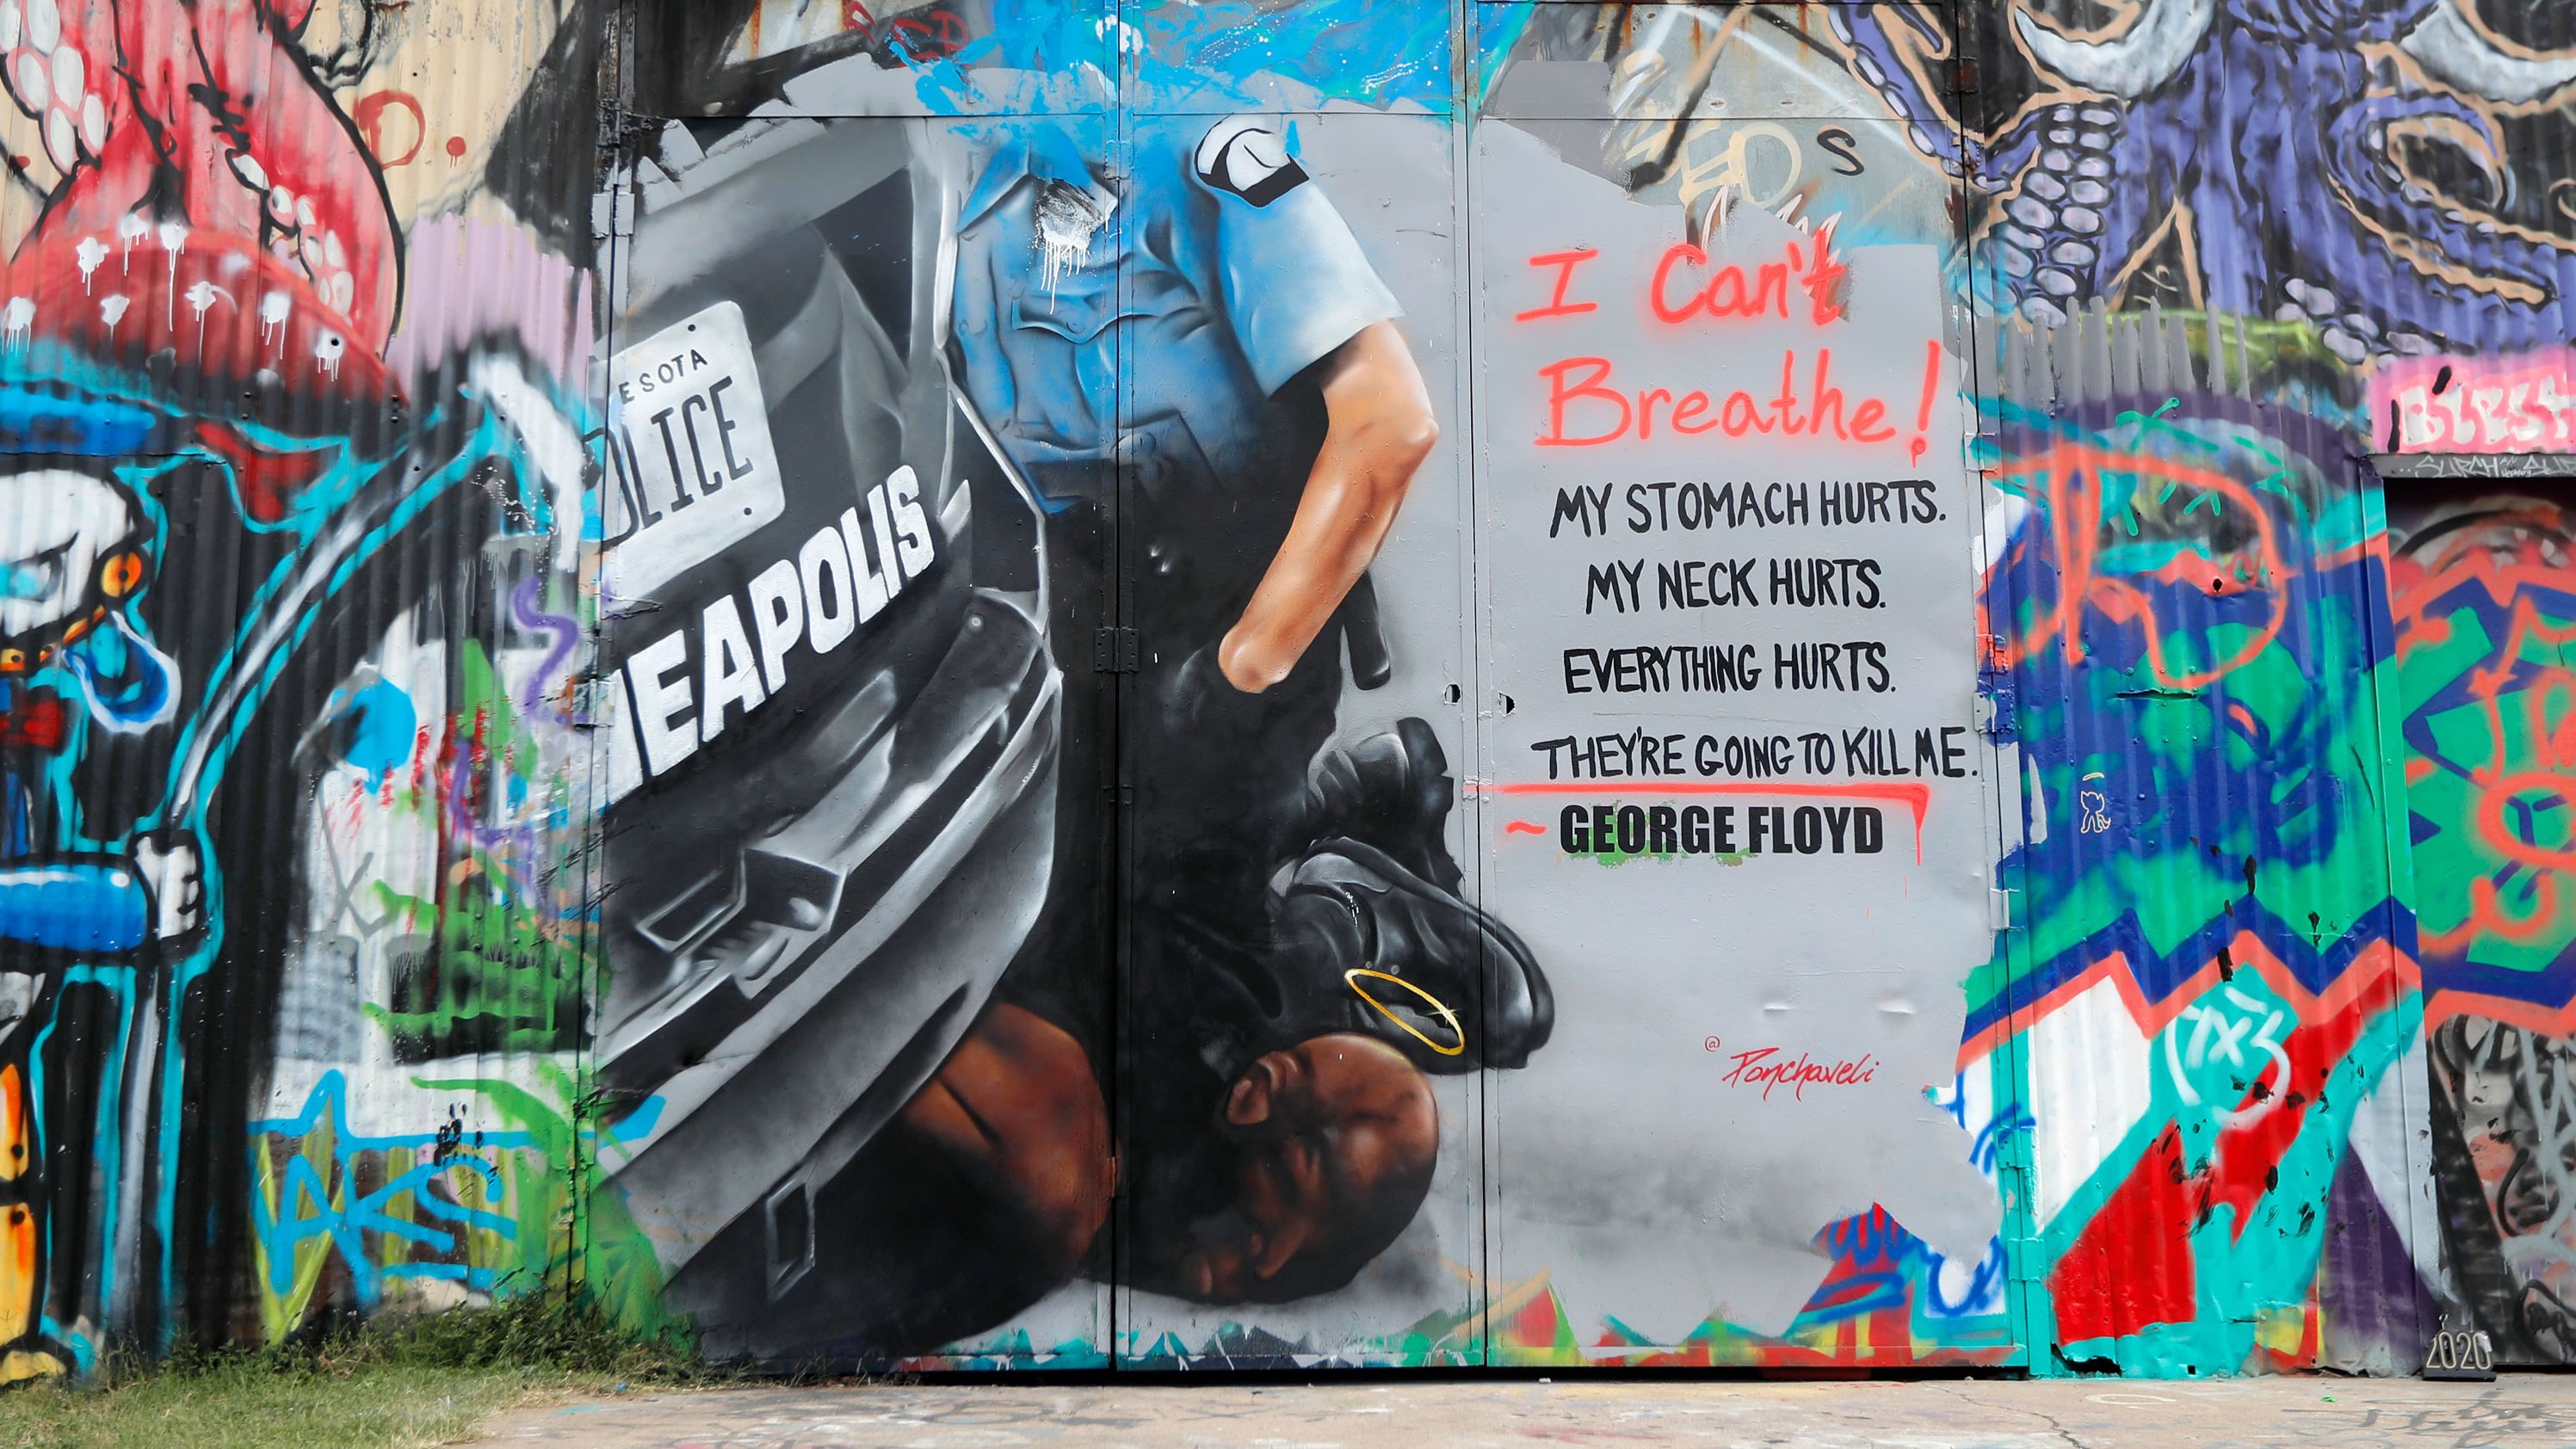 This mural in Dallas, painted by Theo Ponchaveli, depicts police officer Derek Chauvin with his knee on Floyd's neck.